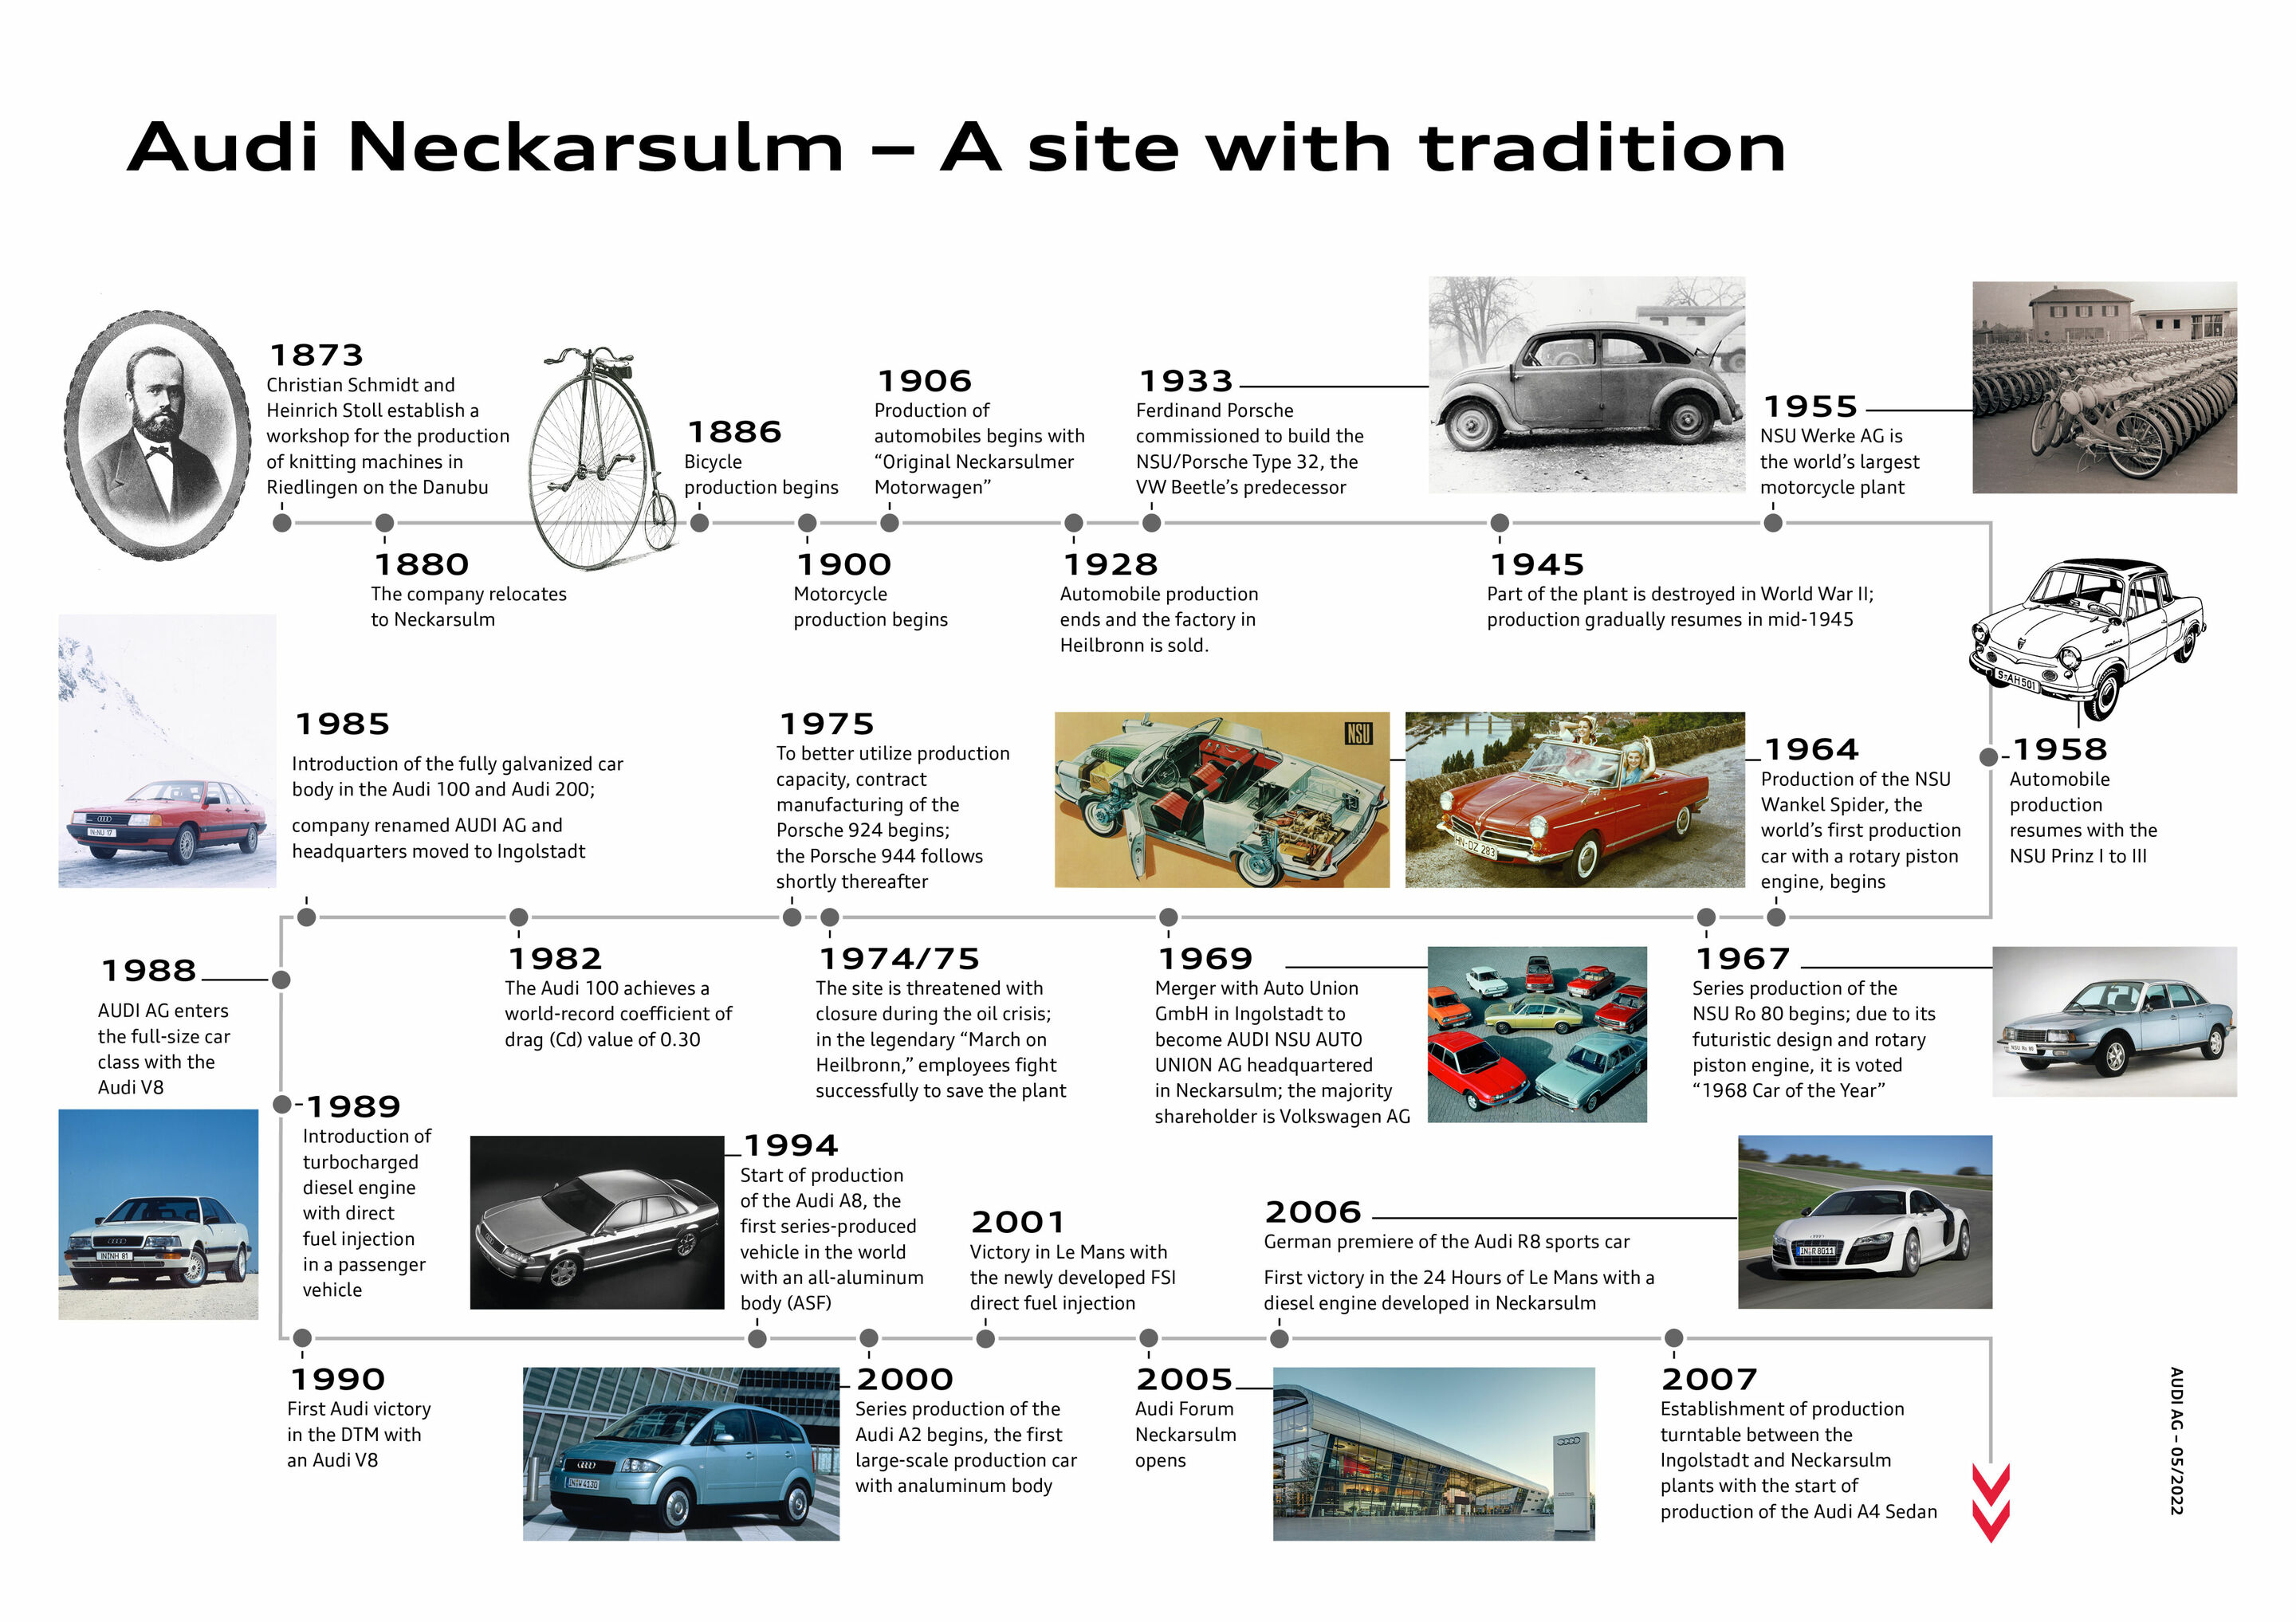 The traditional NSU brand and Audi’s Neckarsulm site: 150 years of innovation and transformation